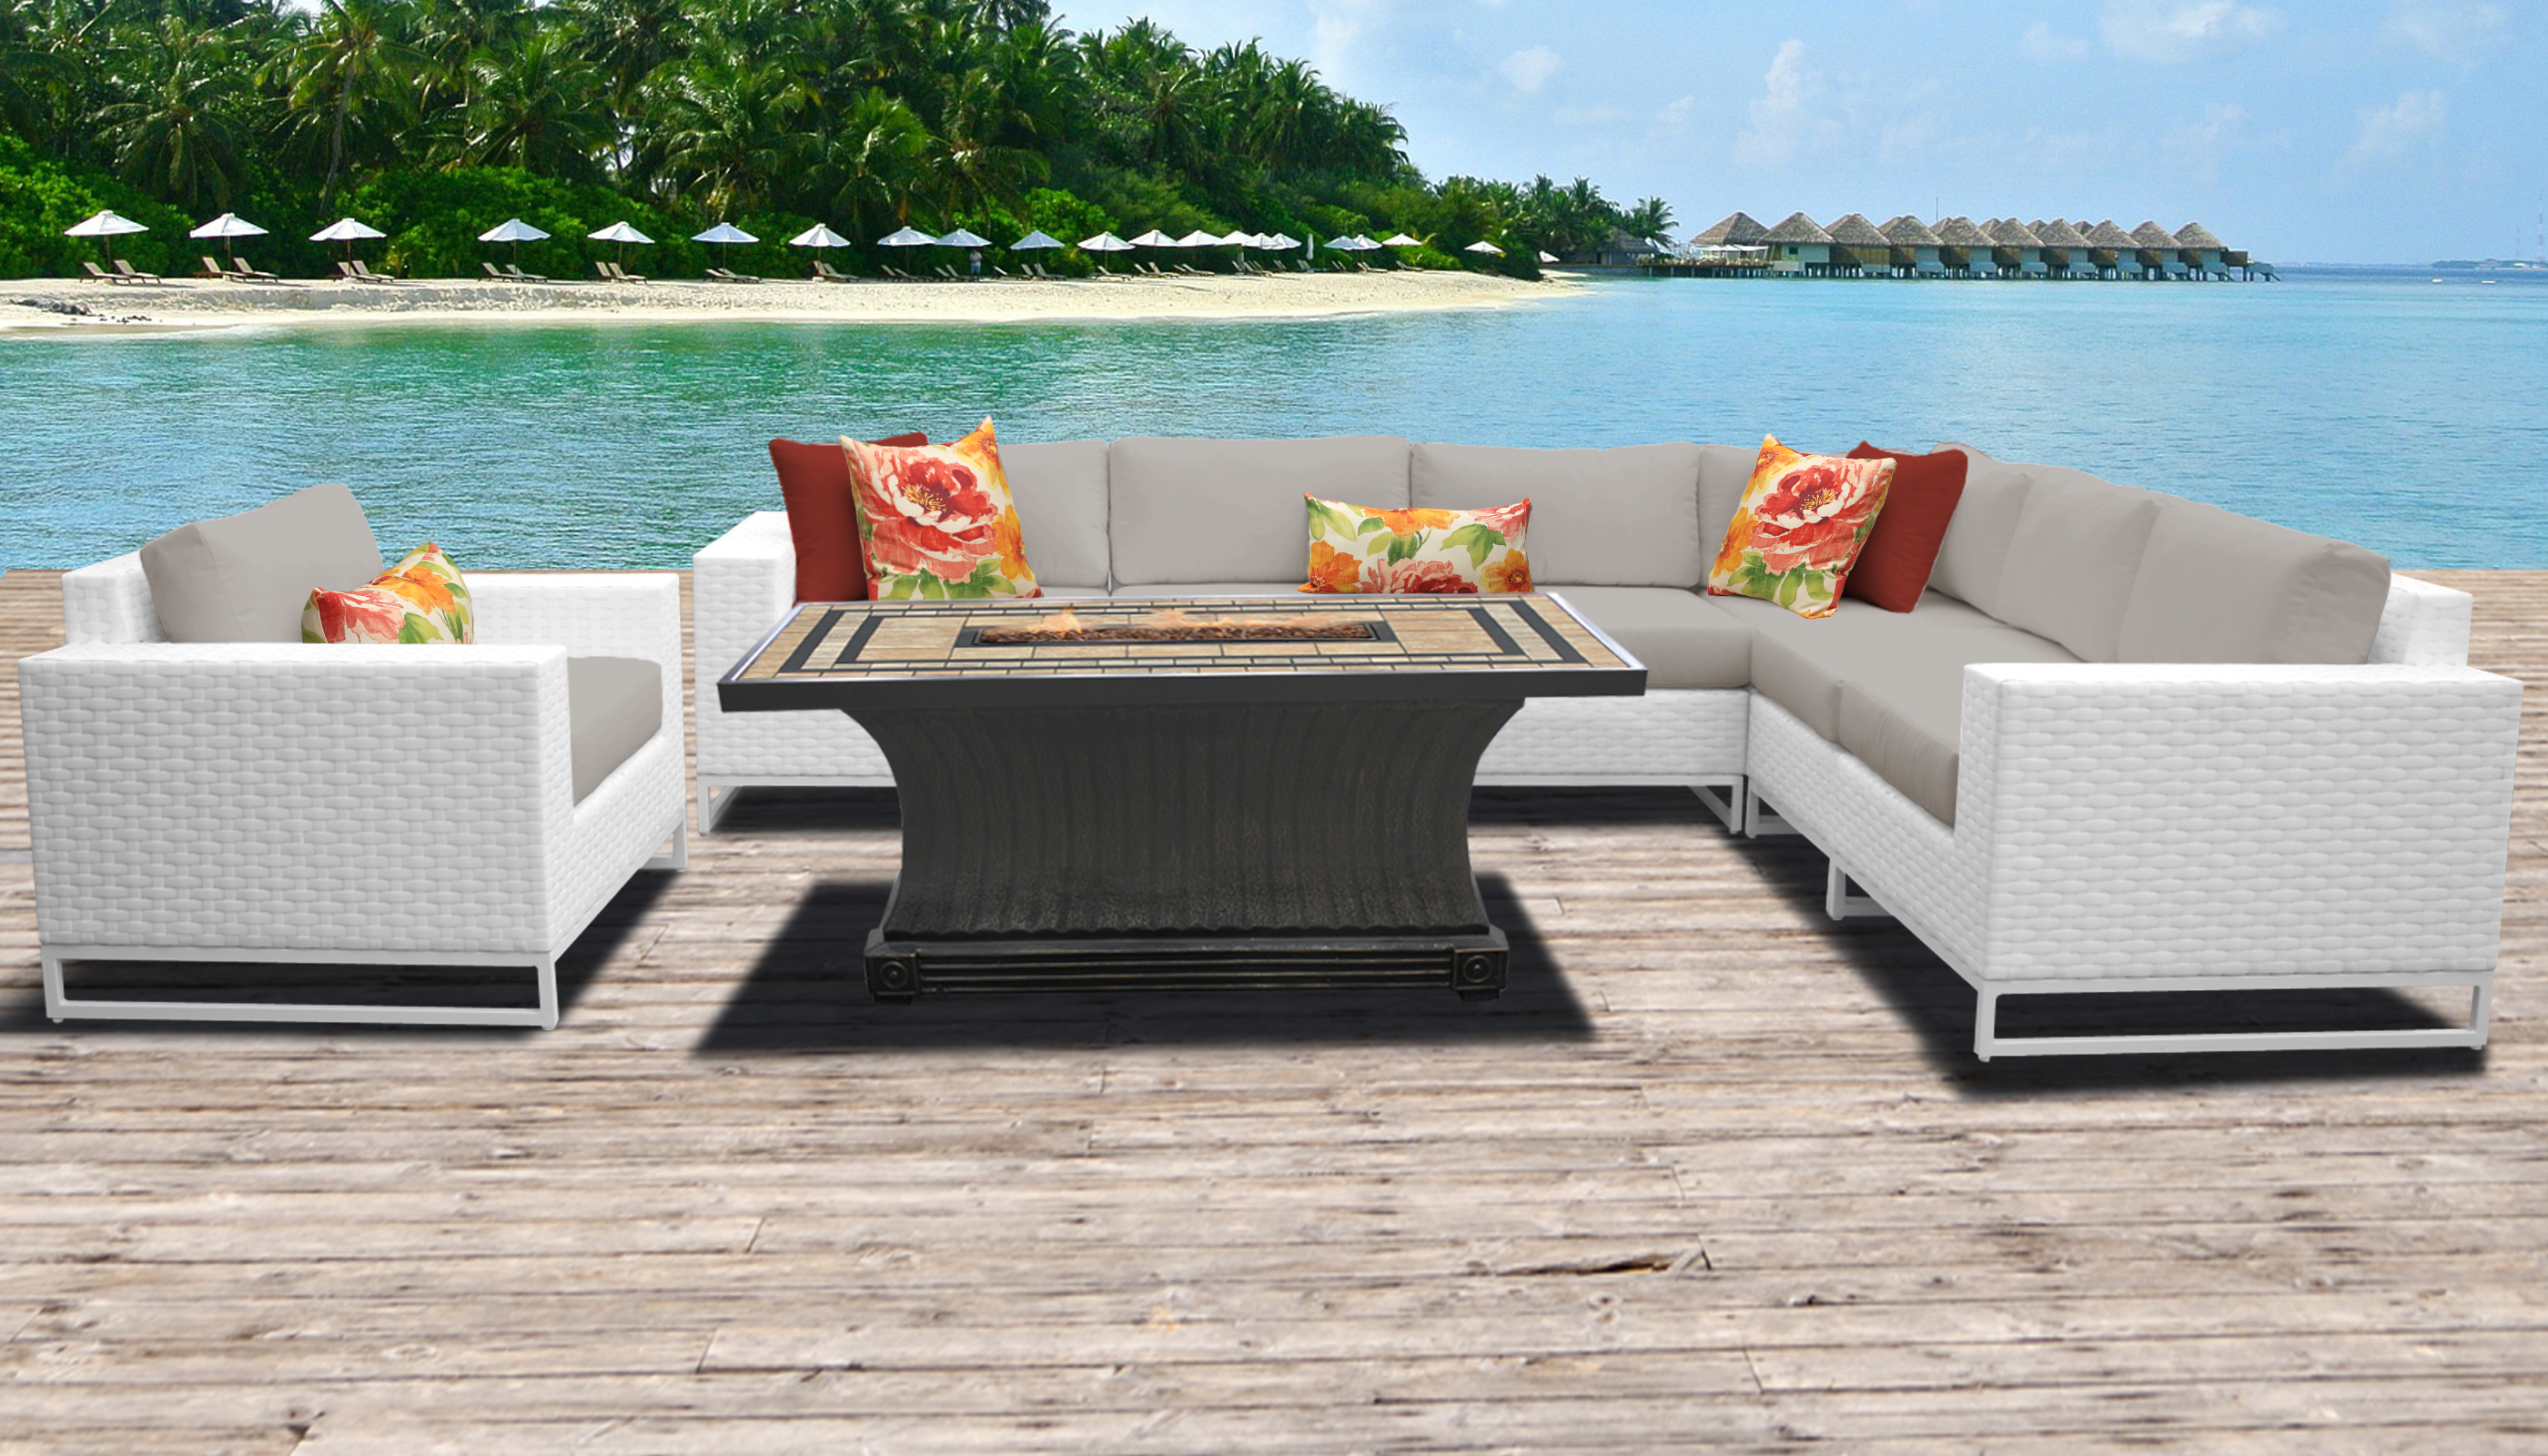 Miami 8 Piece Outdoor Wicker Patio Furniture Set 08d intended for dimensions 2800 X 1600